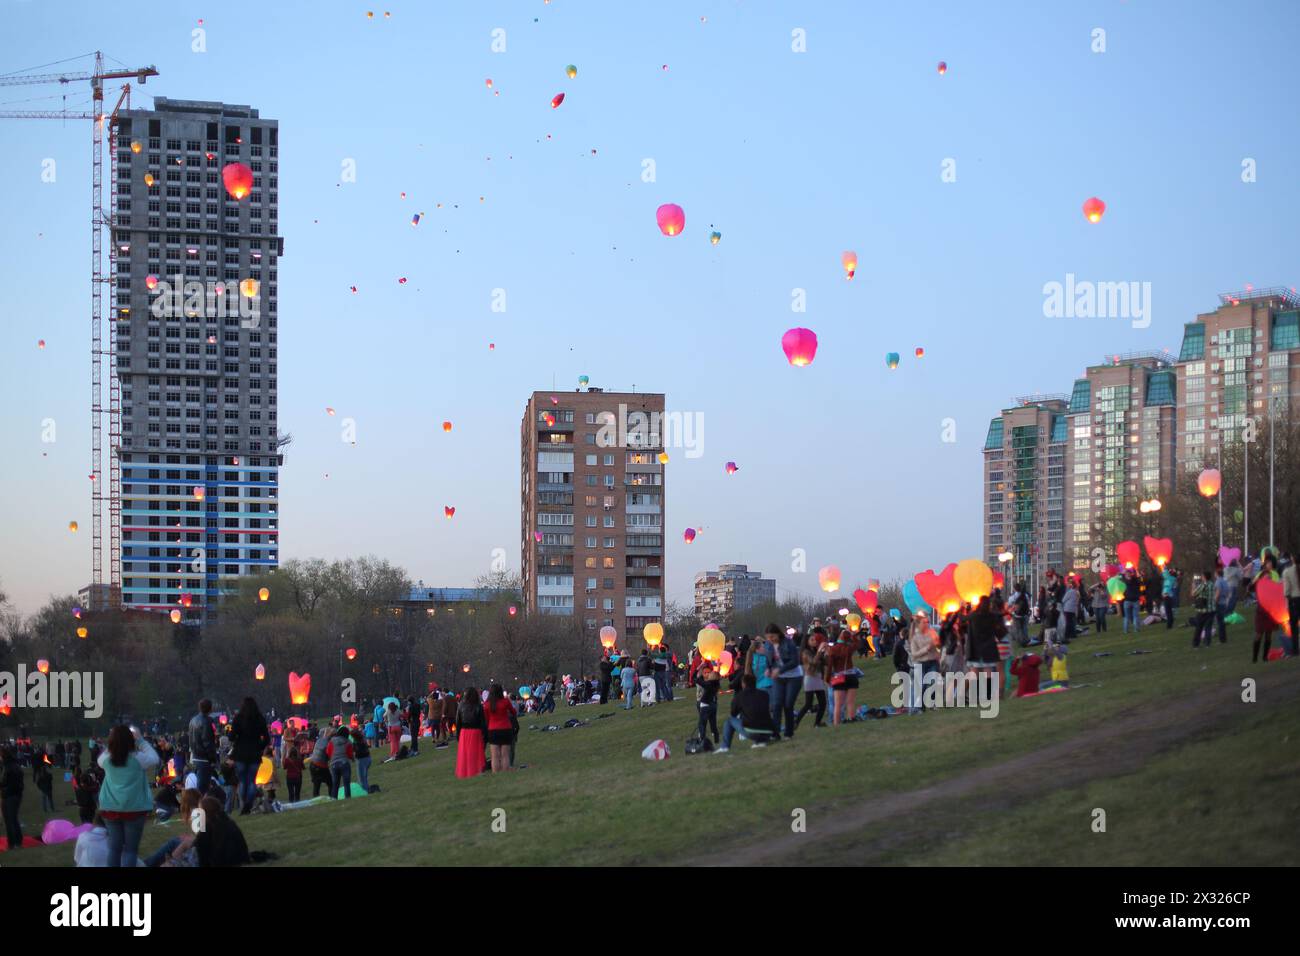 MOSCOW - MAY 2: People are launching a chinese fly lanterns in the sky in a district of Moscow on May 2, 2013 in Moscow, Russia. Stock Photo